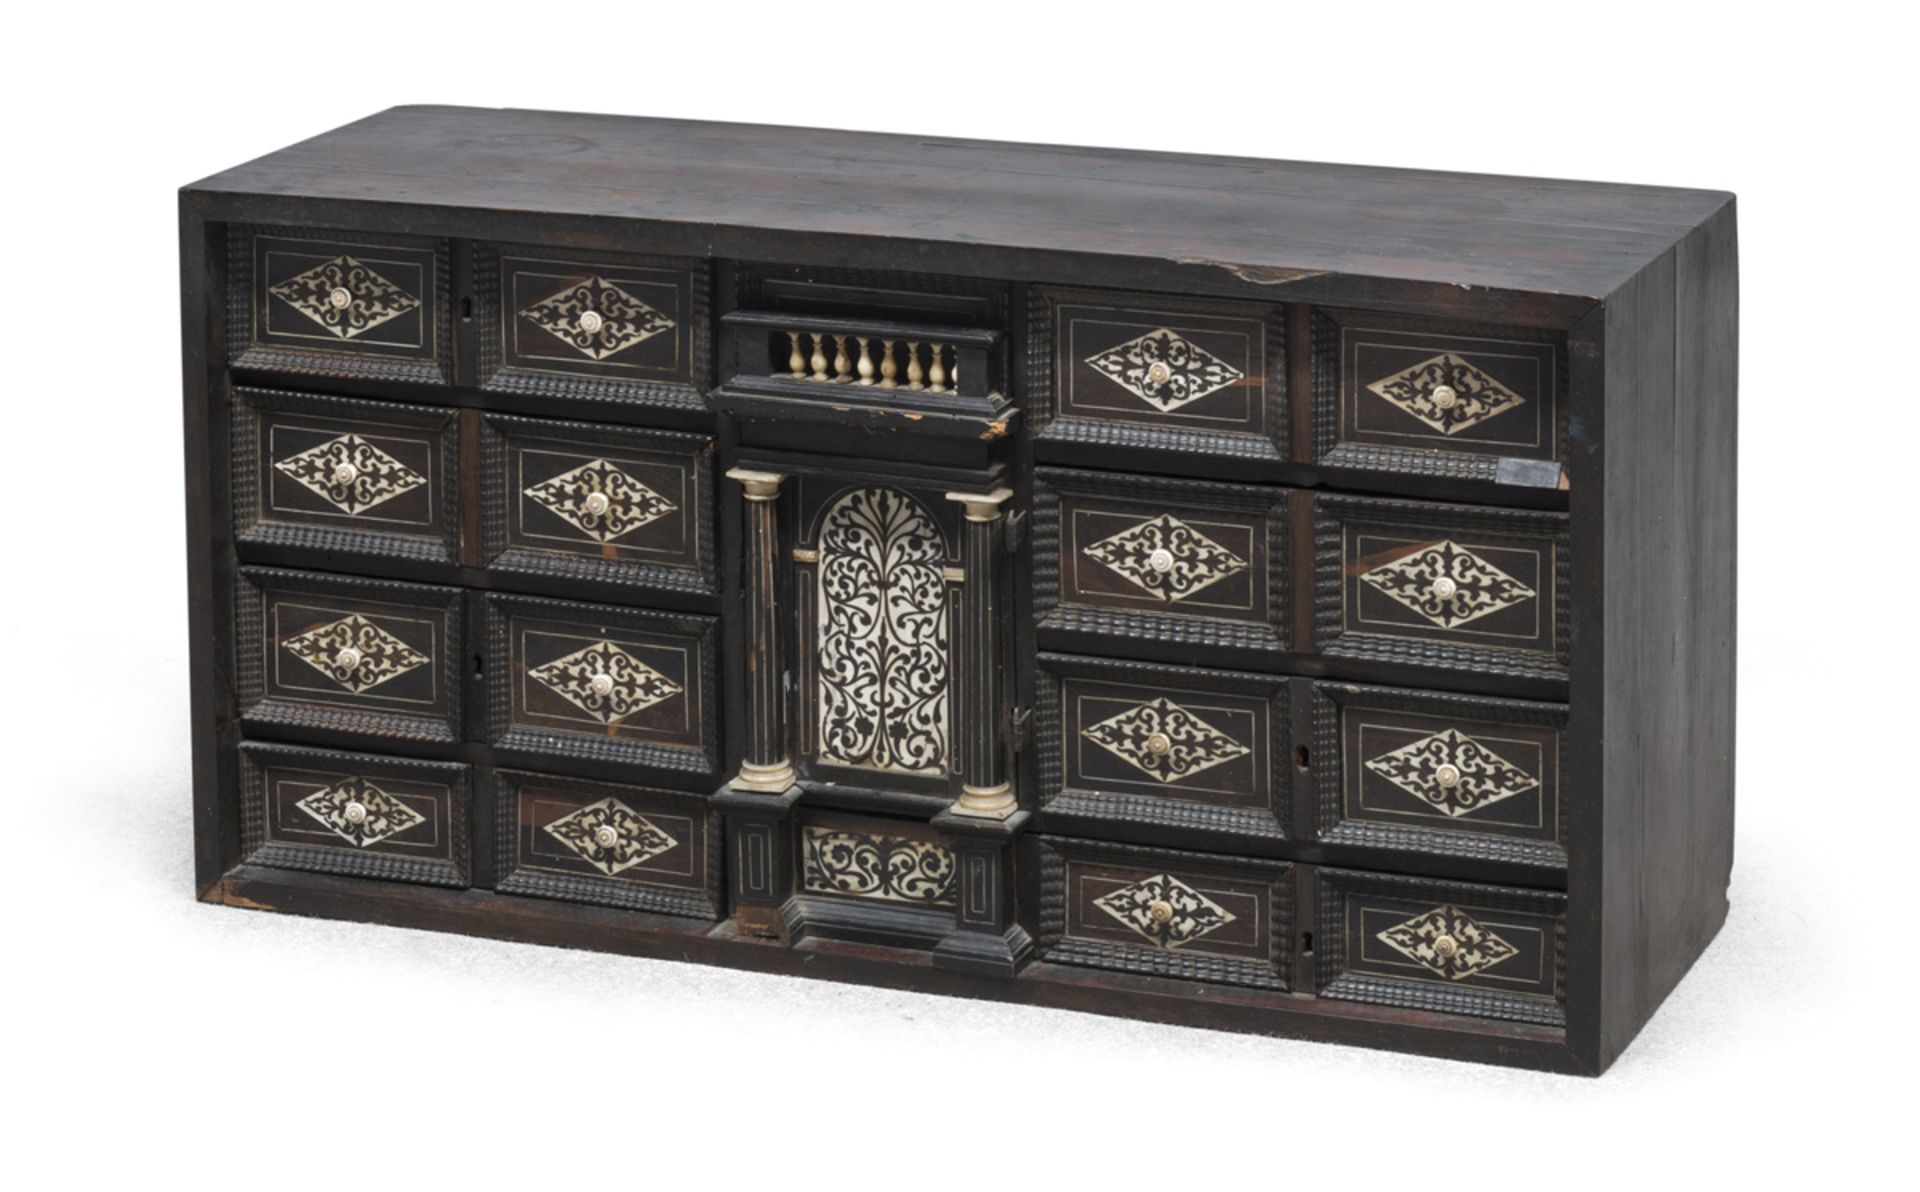 BEAUTIFUL COIN CABINET IN EBONY, LOMBARDY LATE 18TH CENTURY with rhombuse inlays in ivory